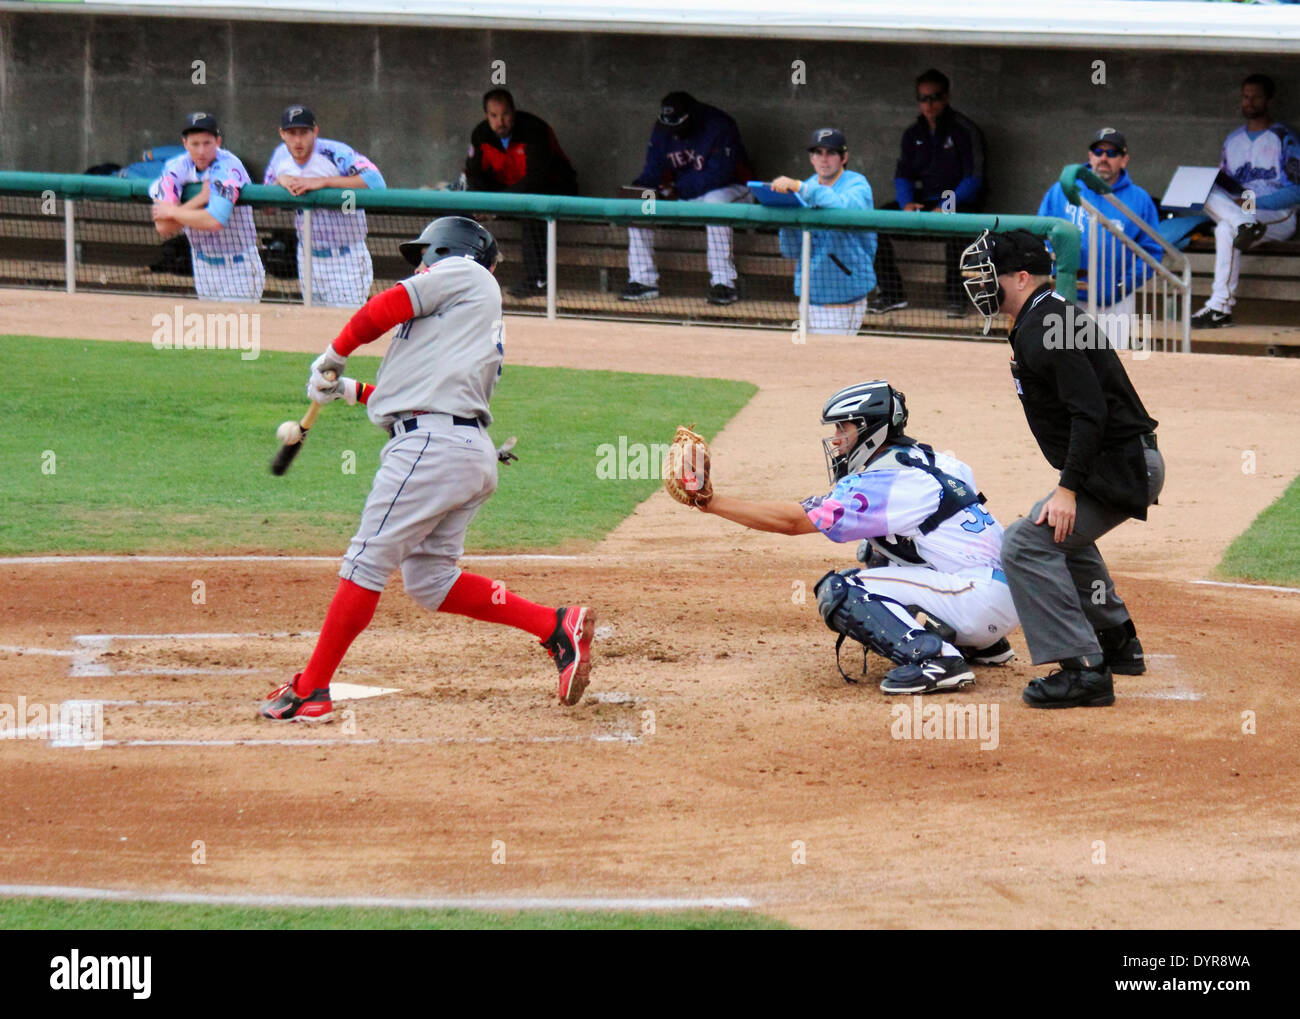 A batter swings and makes contact with the ball at homeplate. Stock Photo